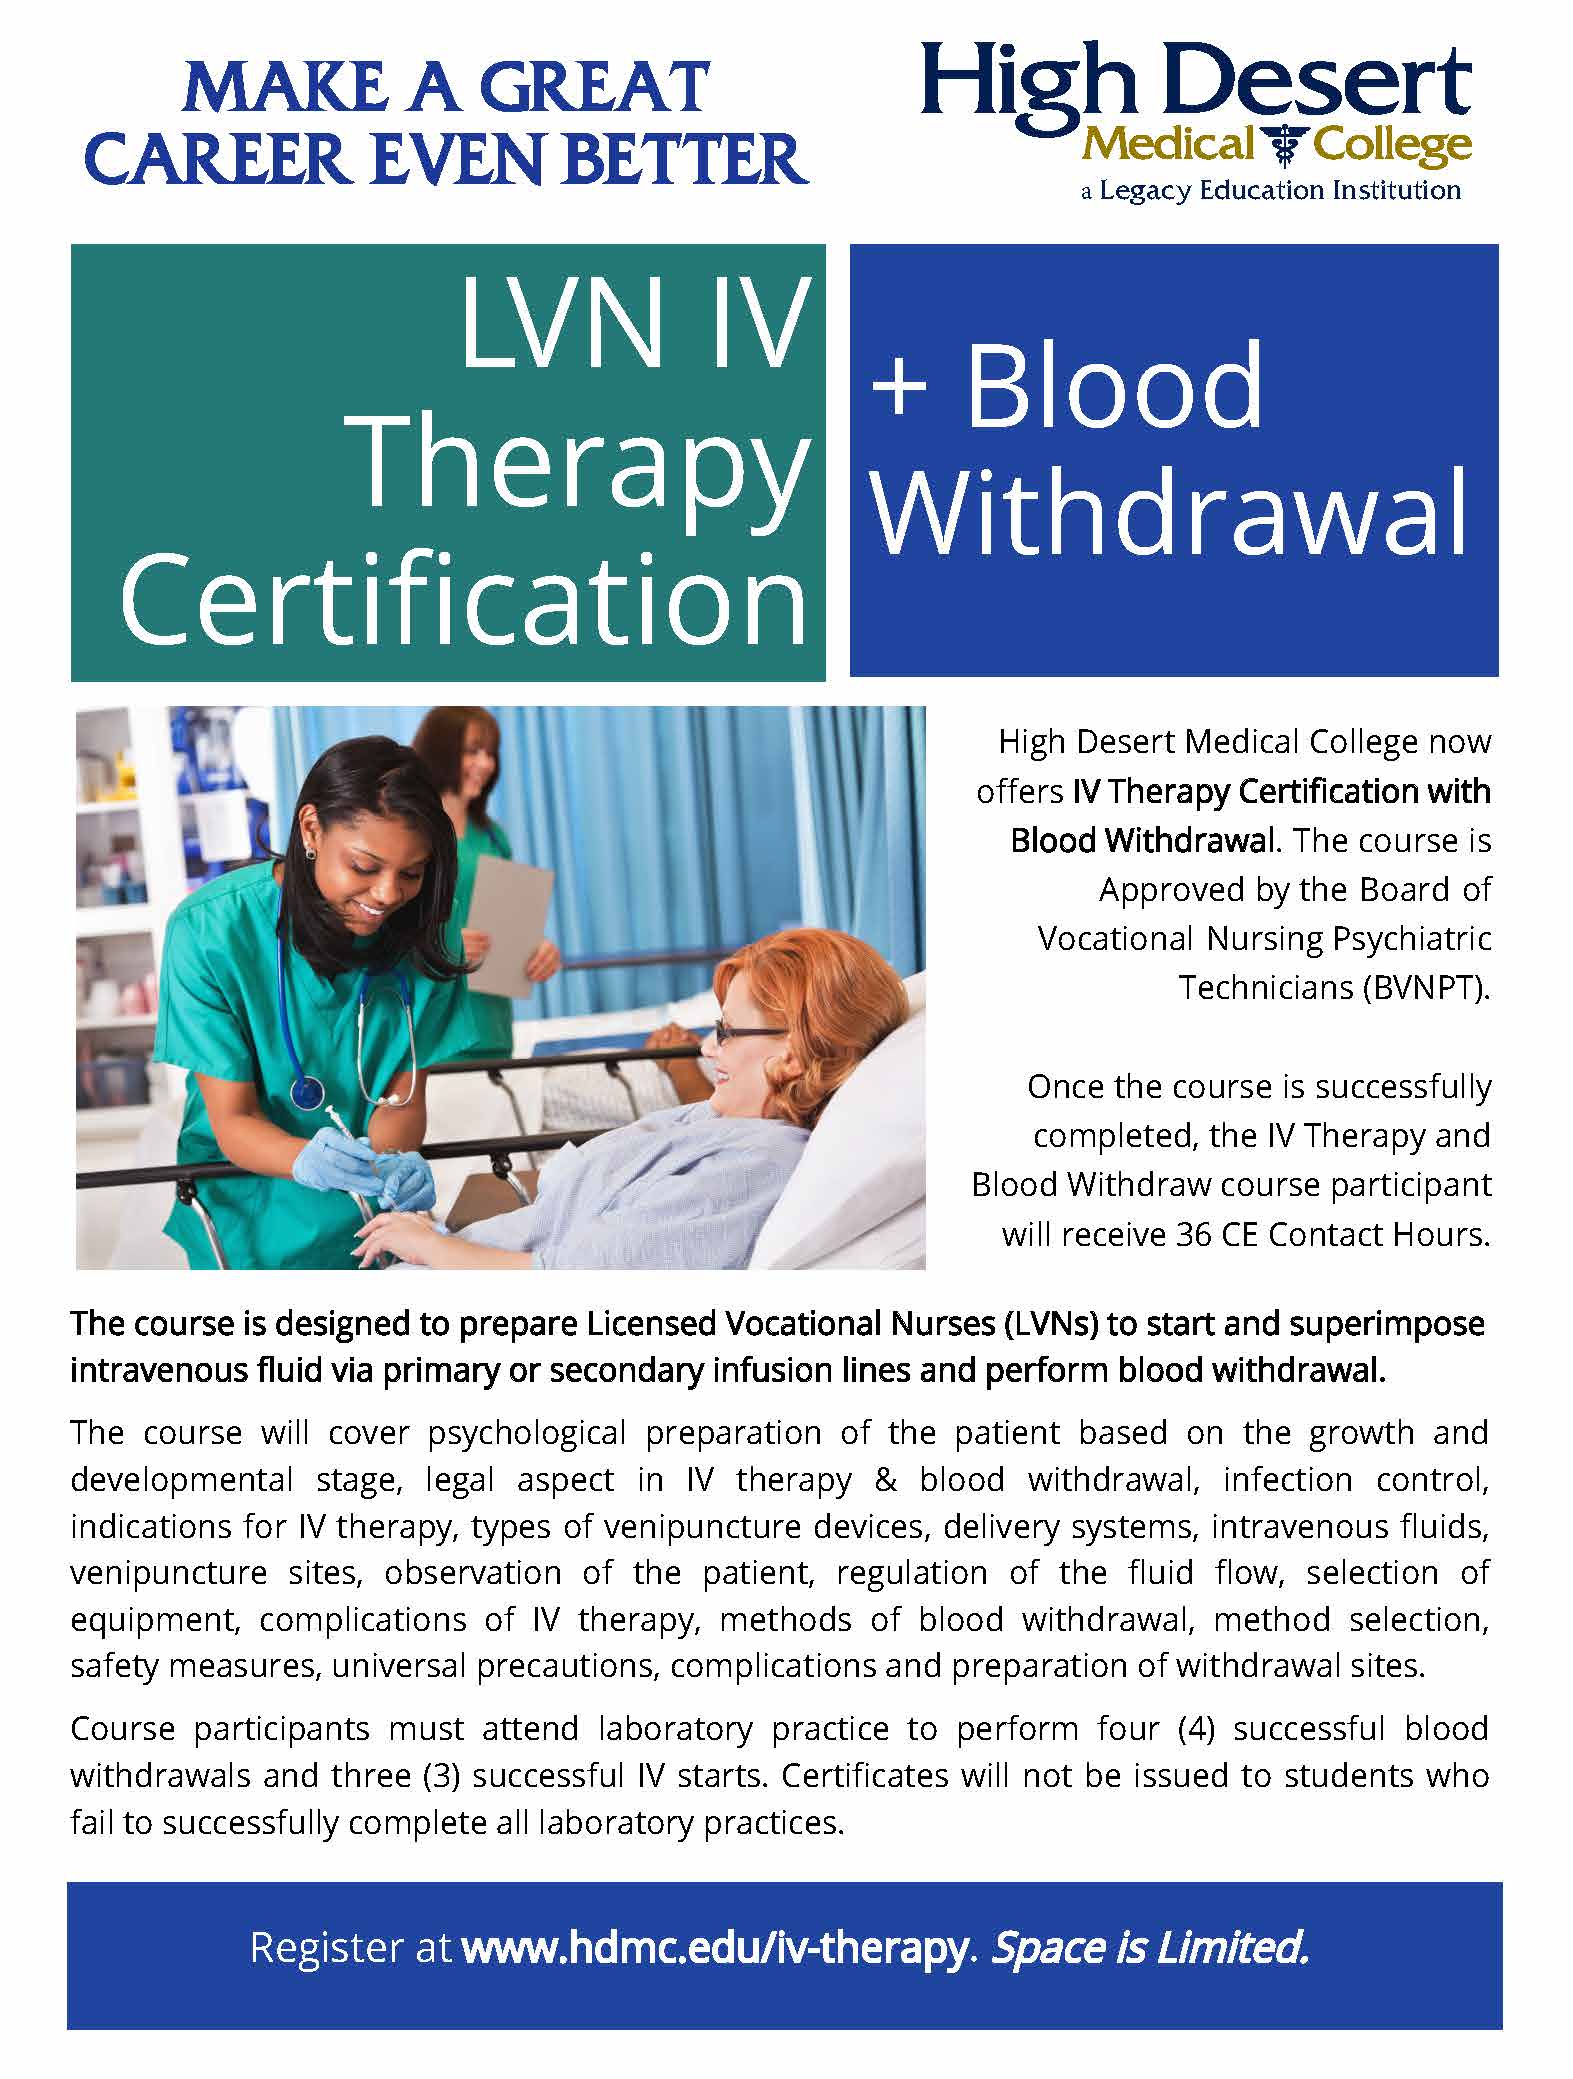 iv certification and blood withdrawal class near me Cori Fincher